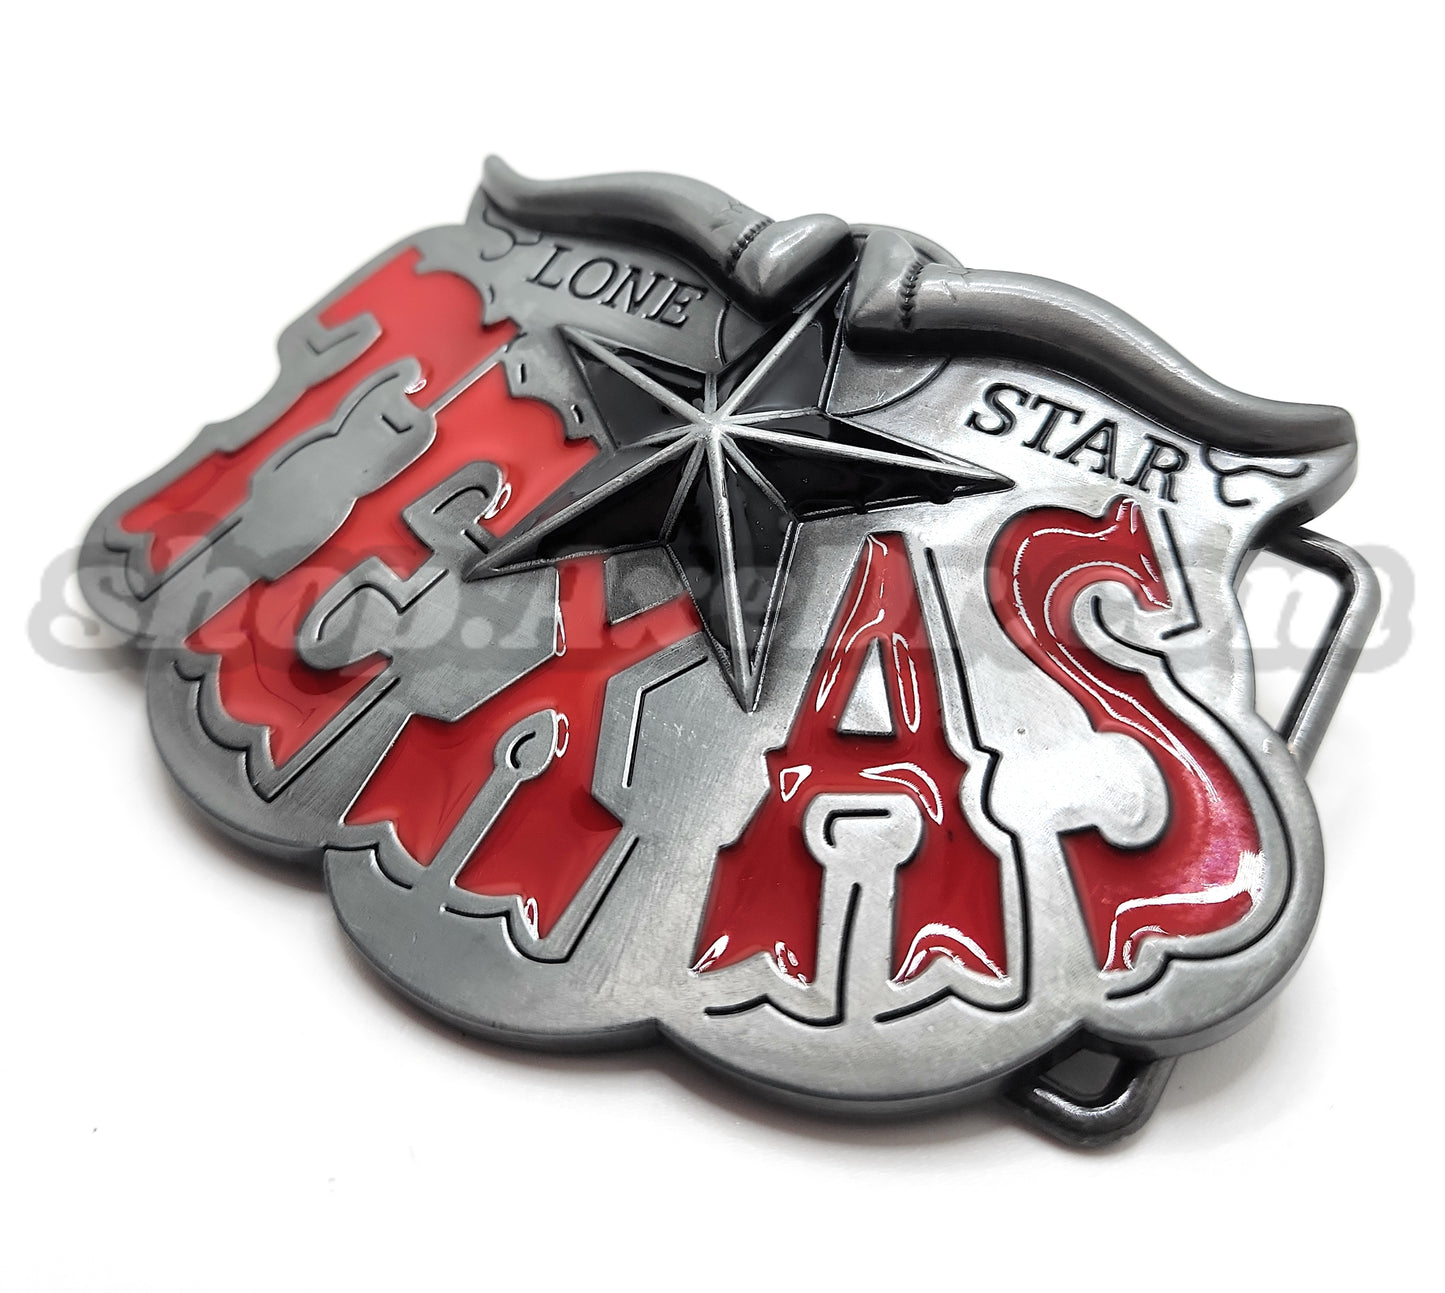 Red Texas Lone Star Belt Buckle with Horns and Star